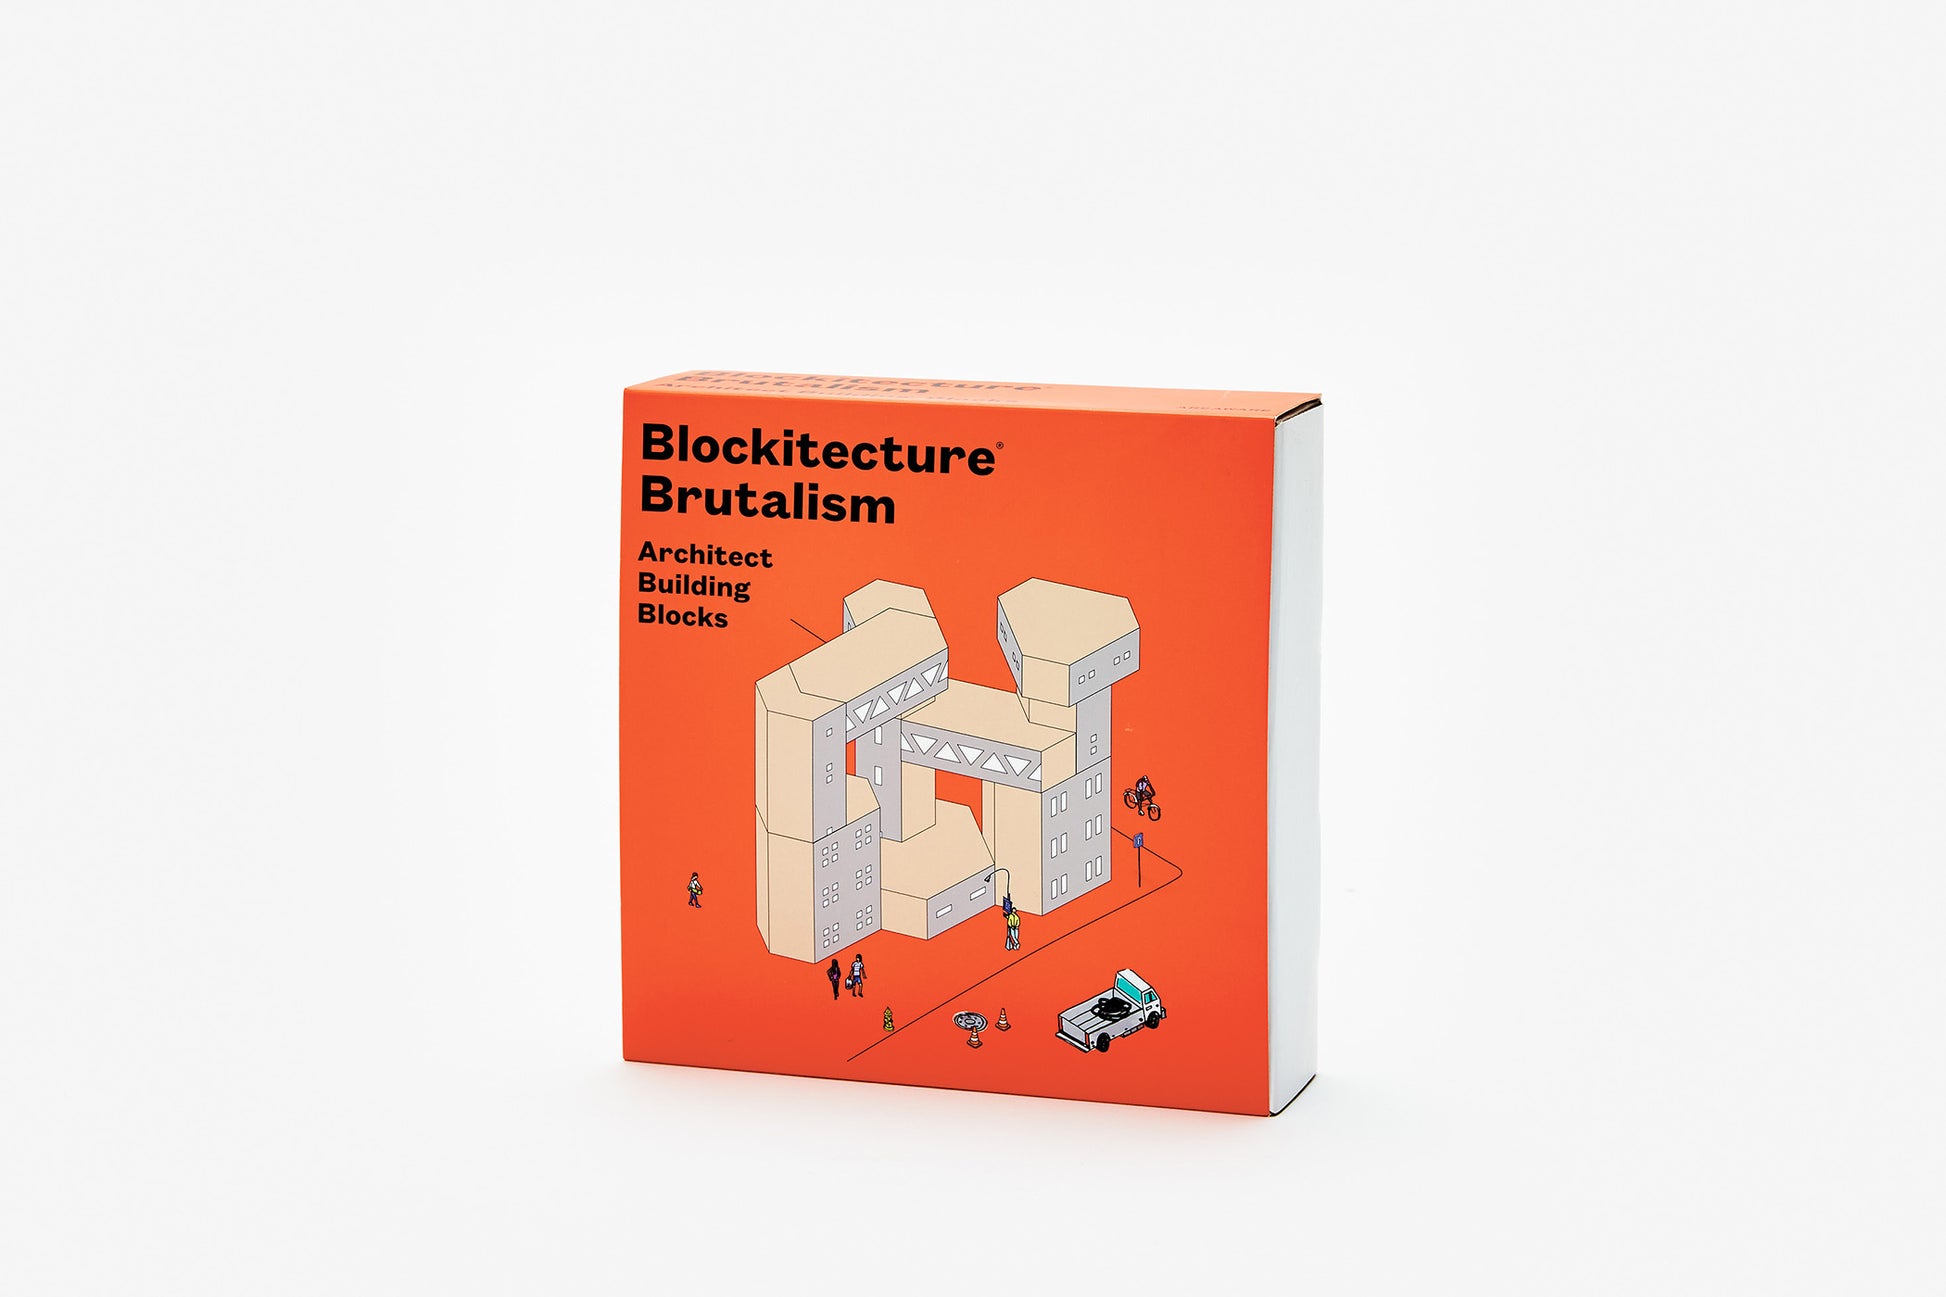 Orange box for wooden building blocks with grey building pattern